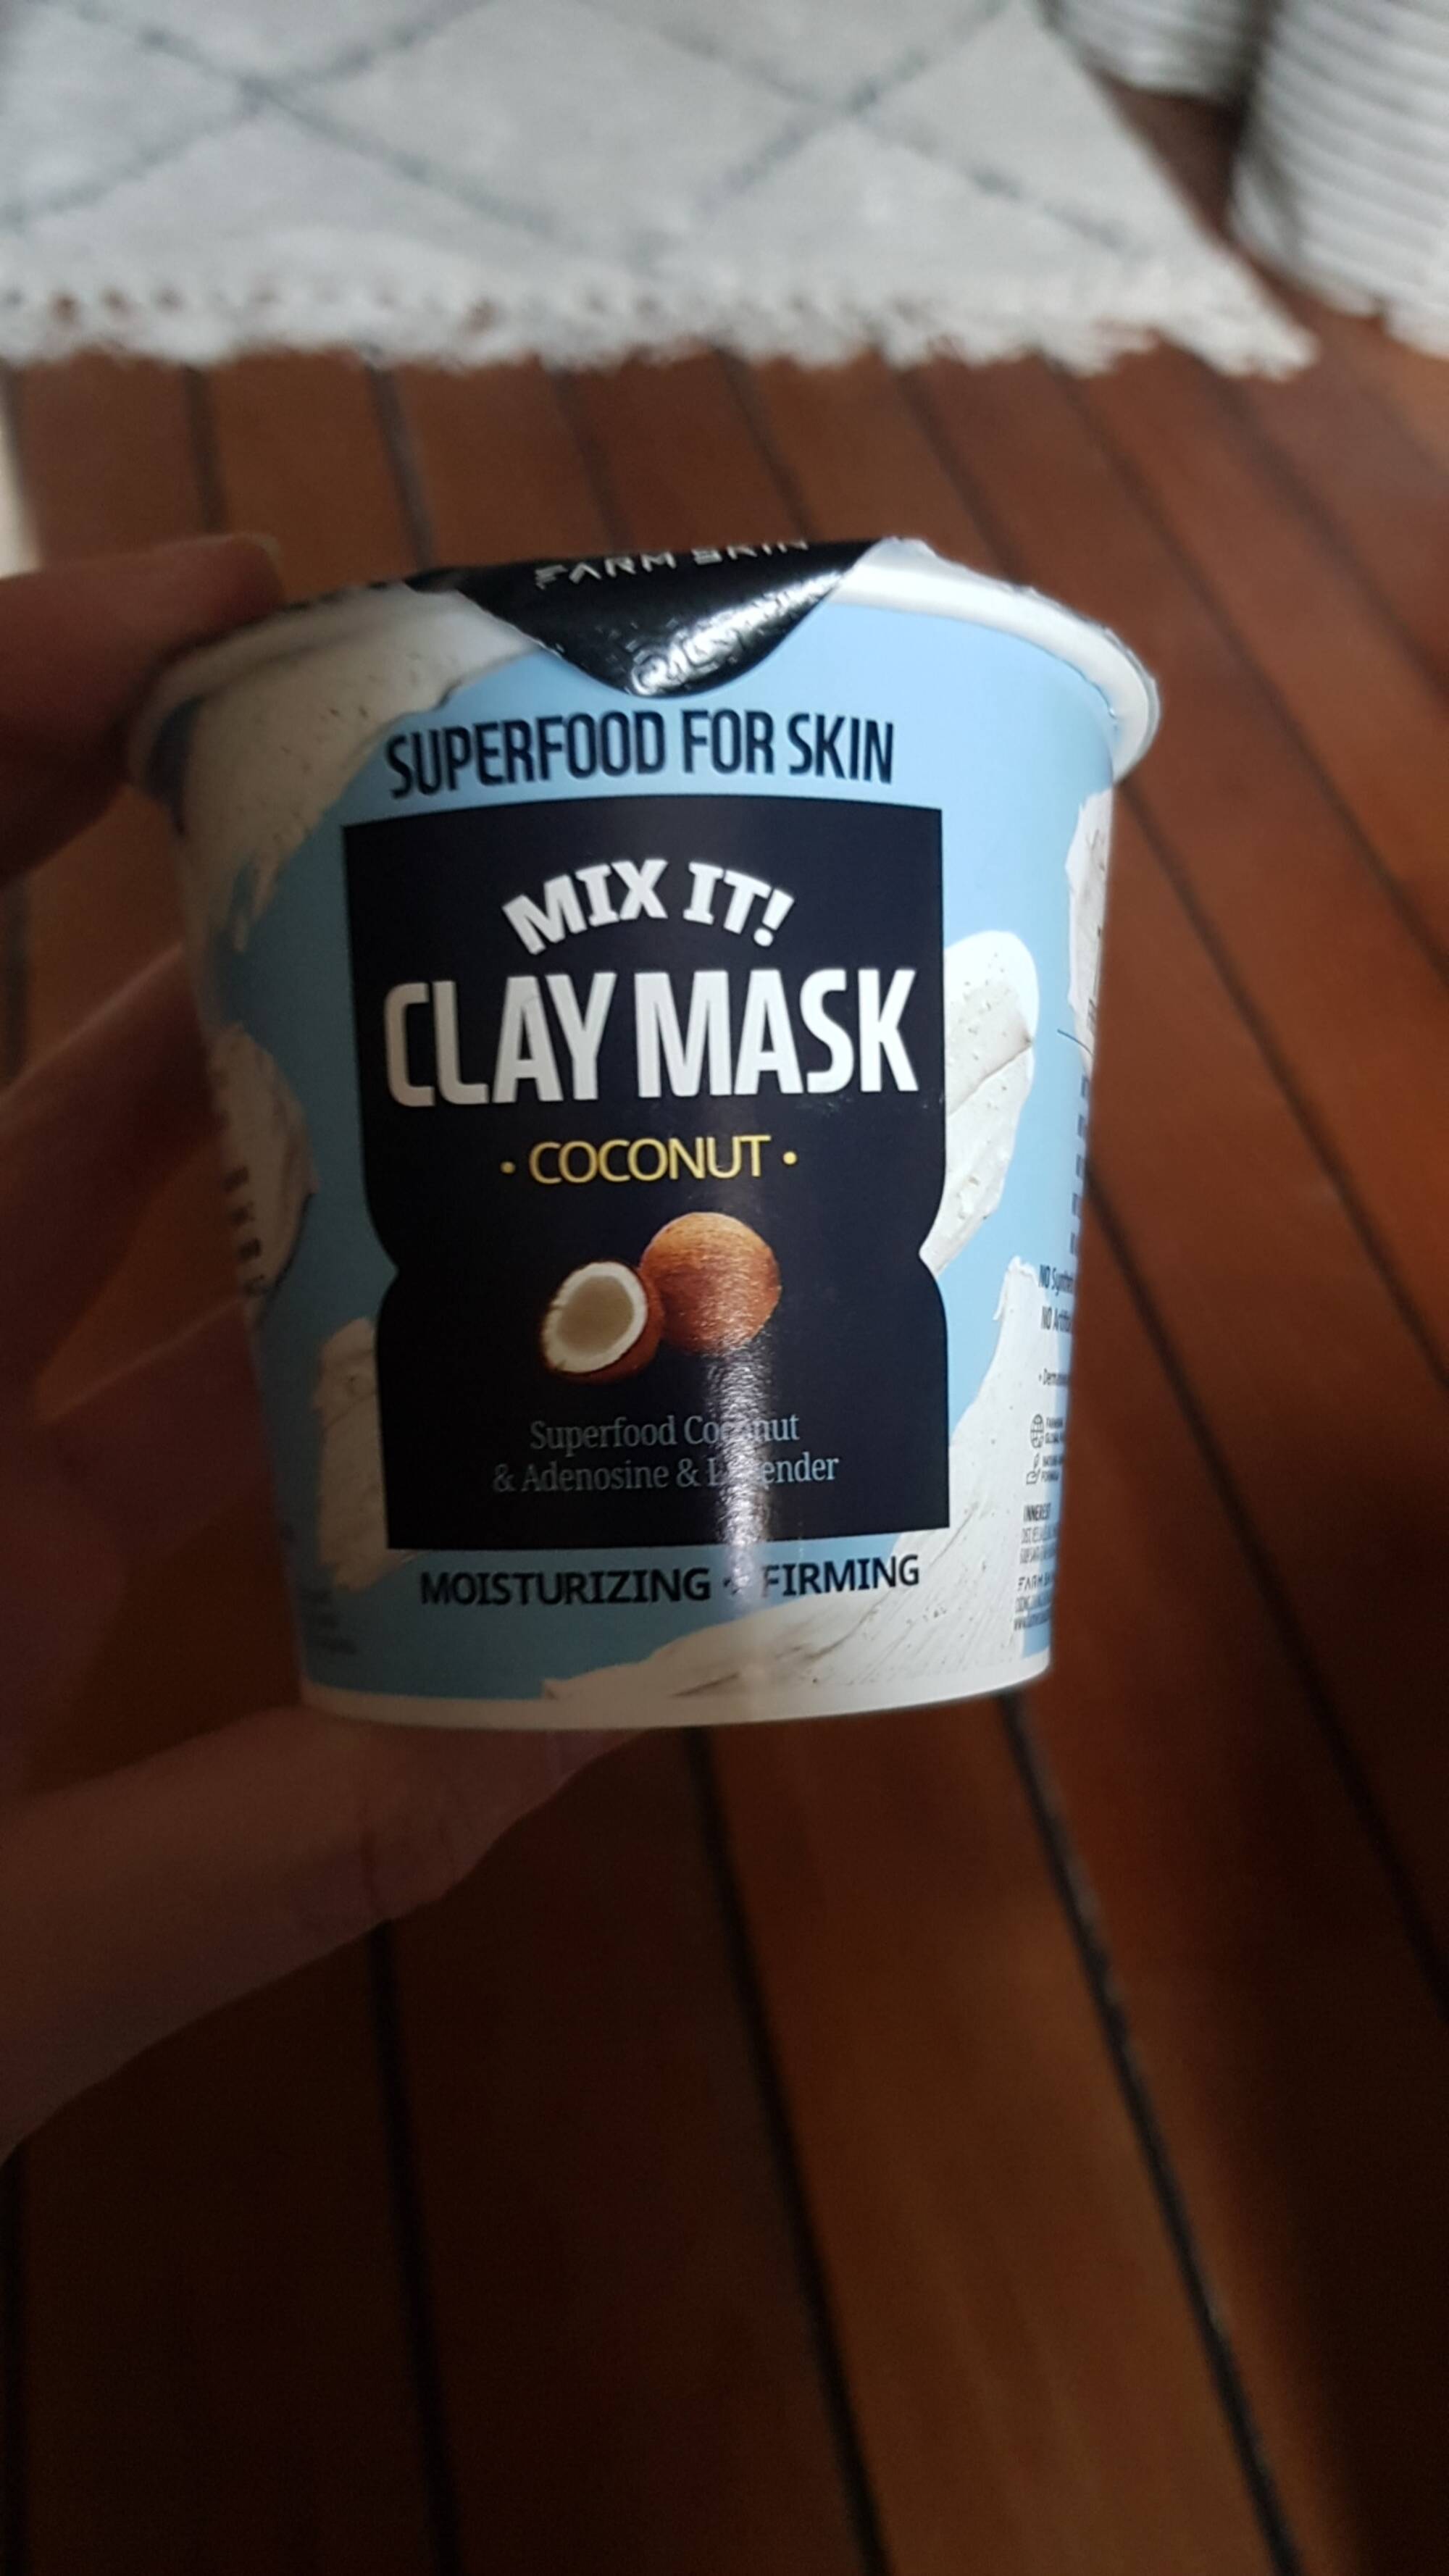 FARM SKIN - Superfood for skin - Mix it! clay mask coconut